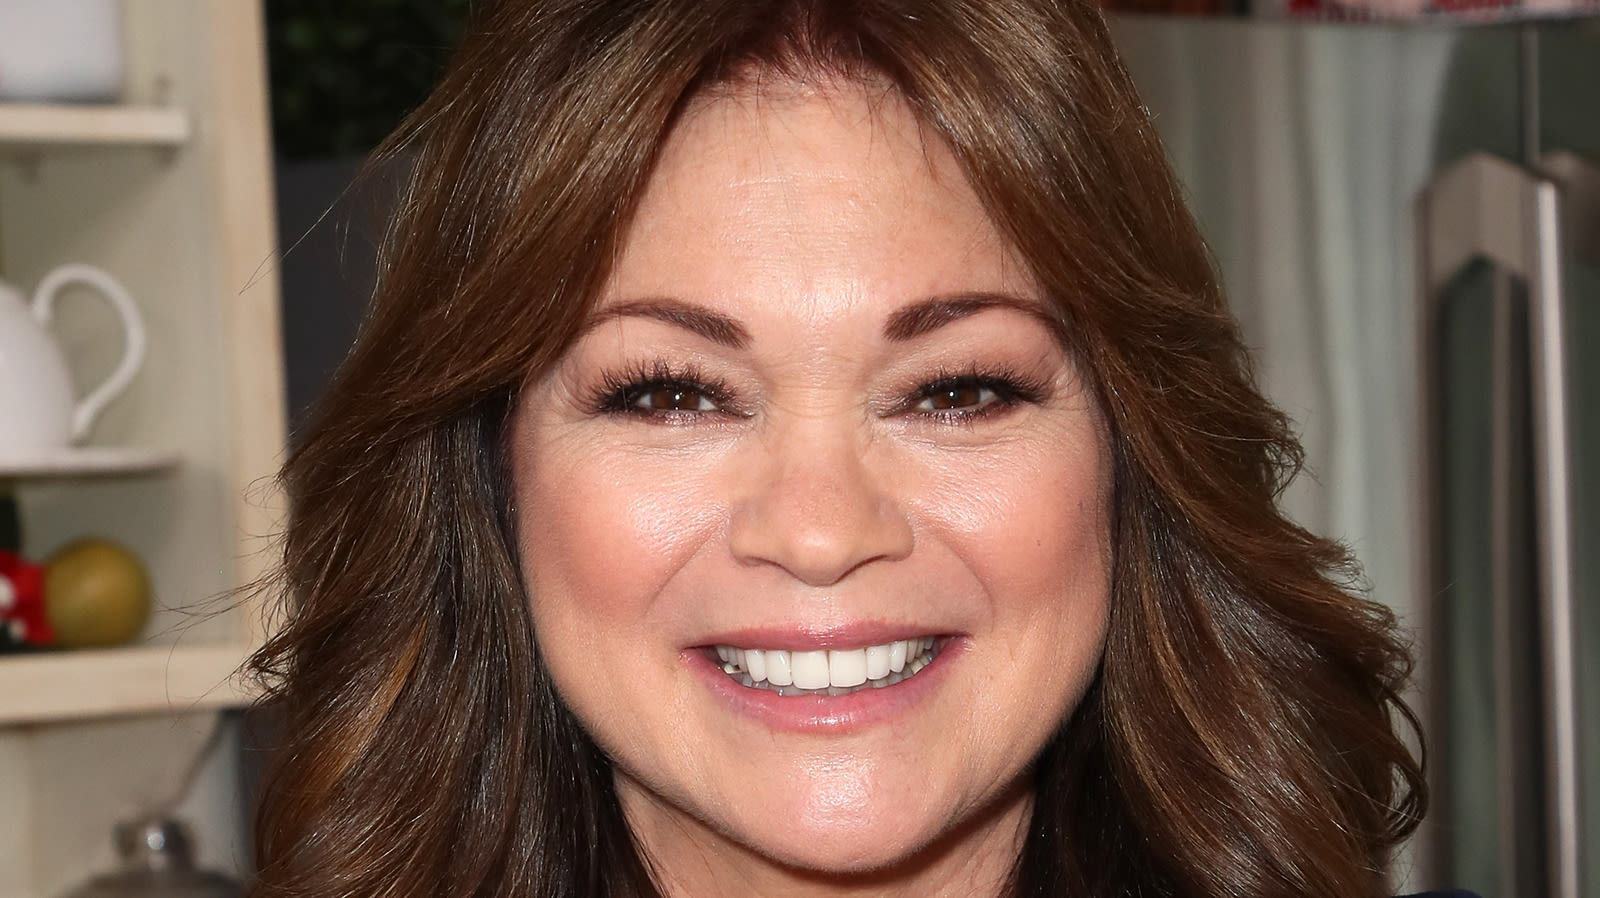 Valerie Bertinelli's Unexpected Favorite Fast Food Meal - Exclusive